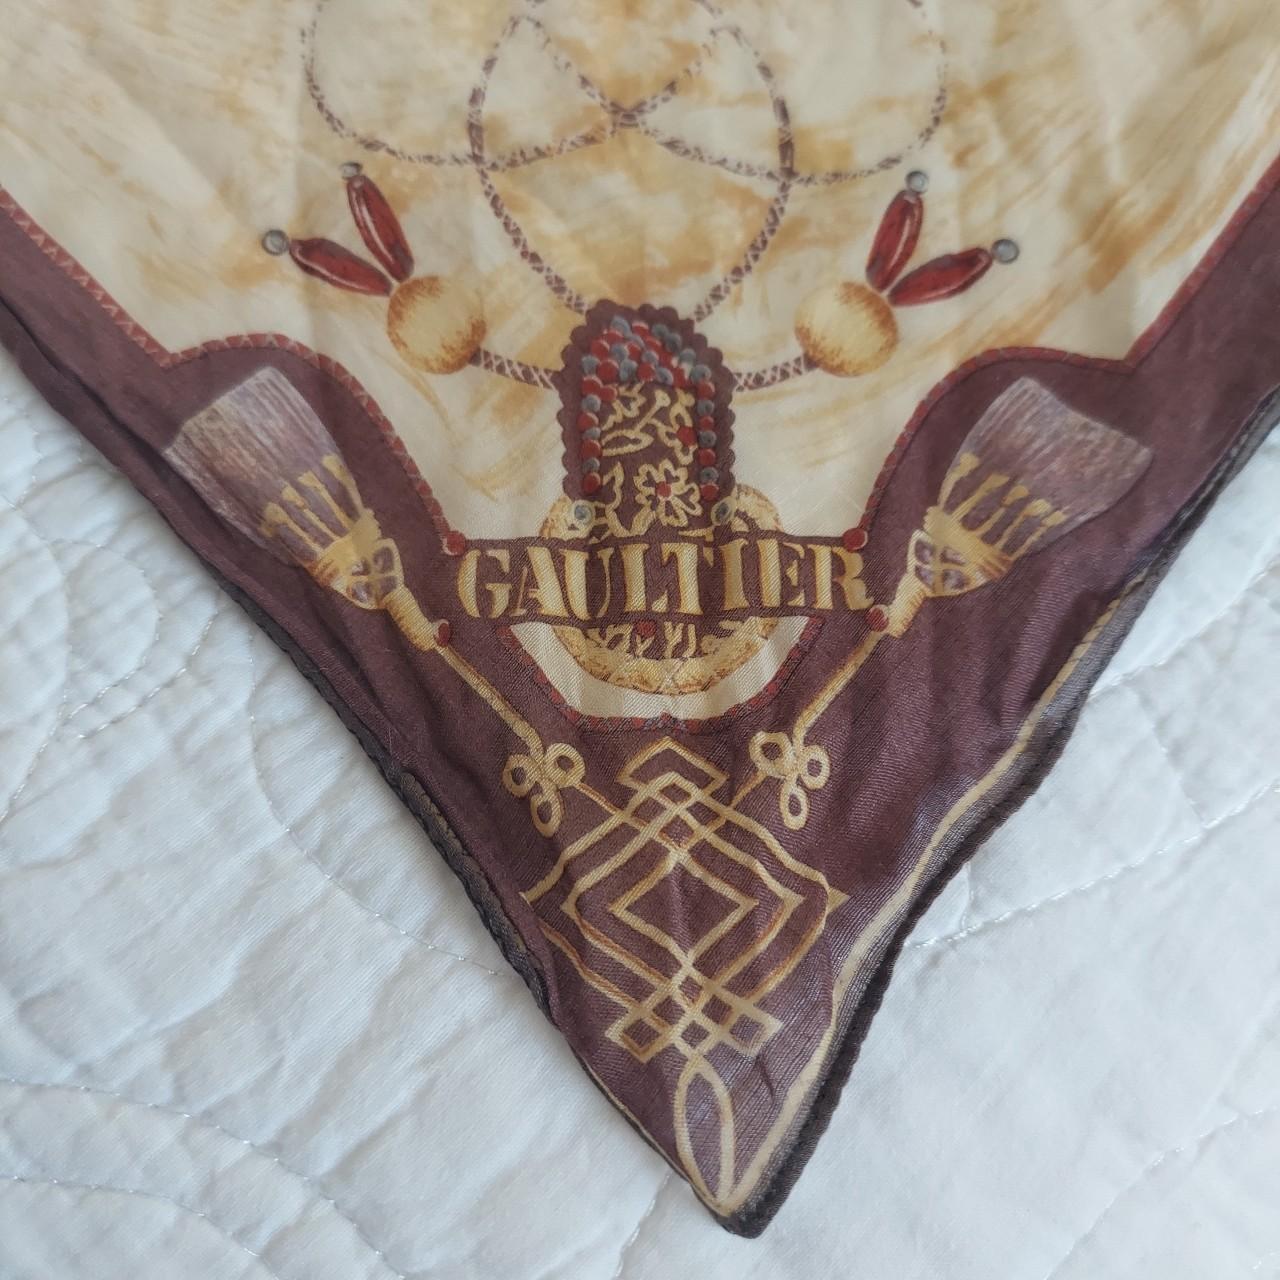 Product Image 1 - Free shipping!
 
Gaultier silk scarf